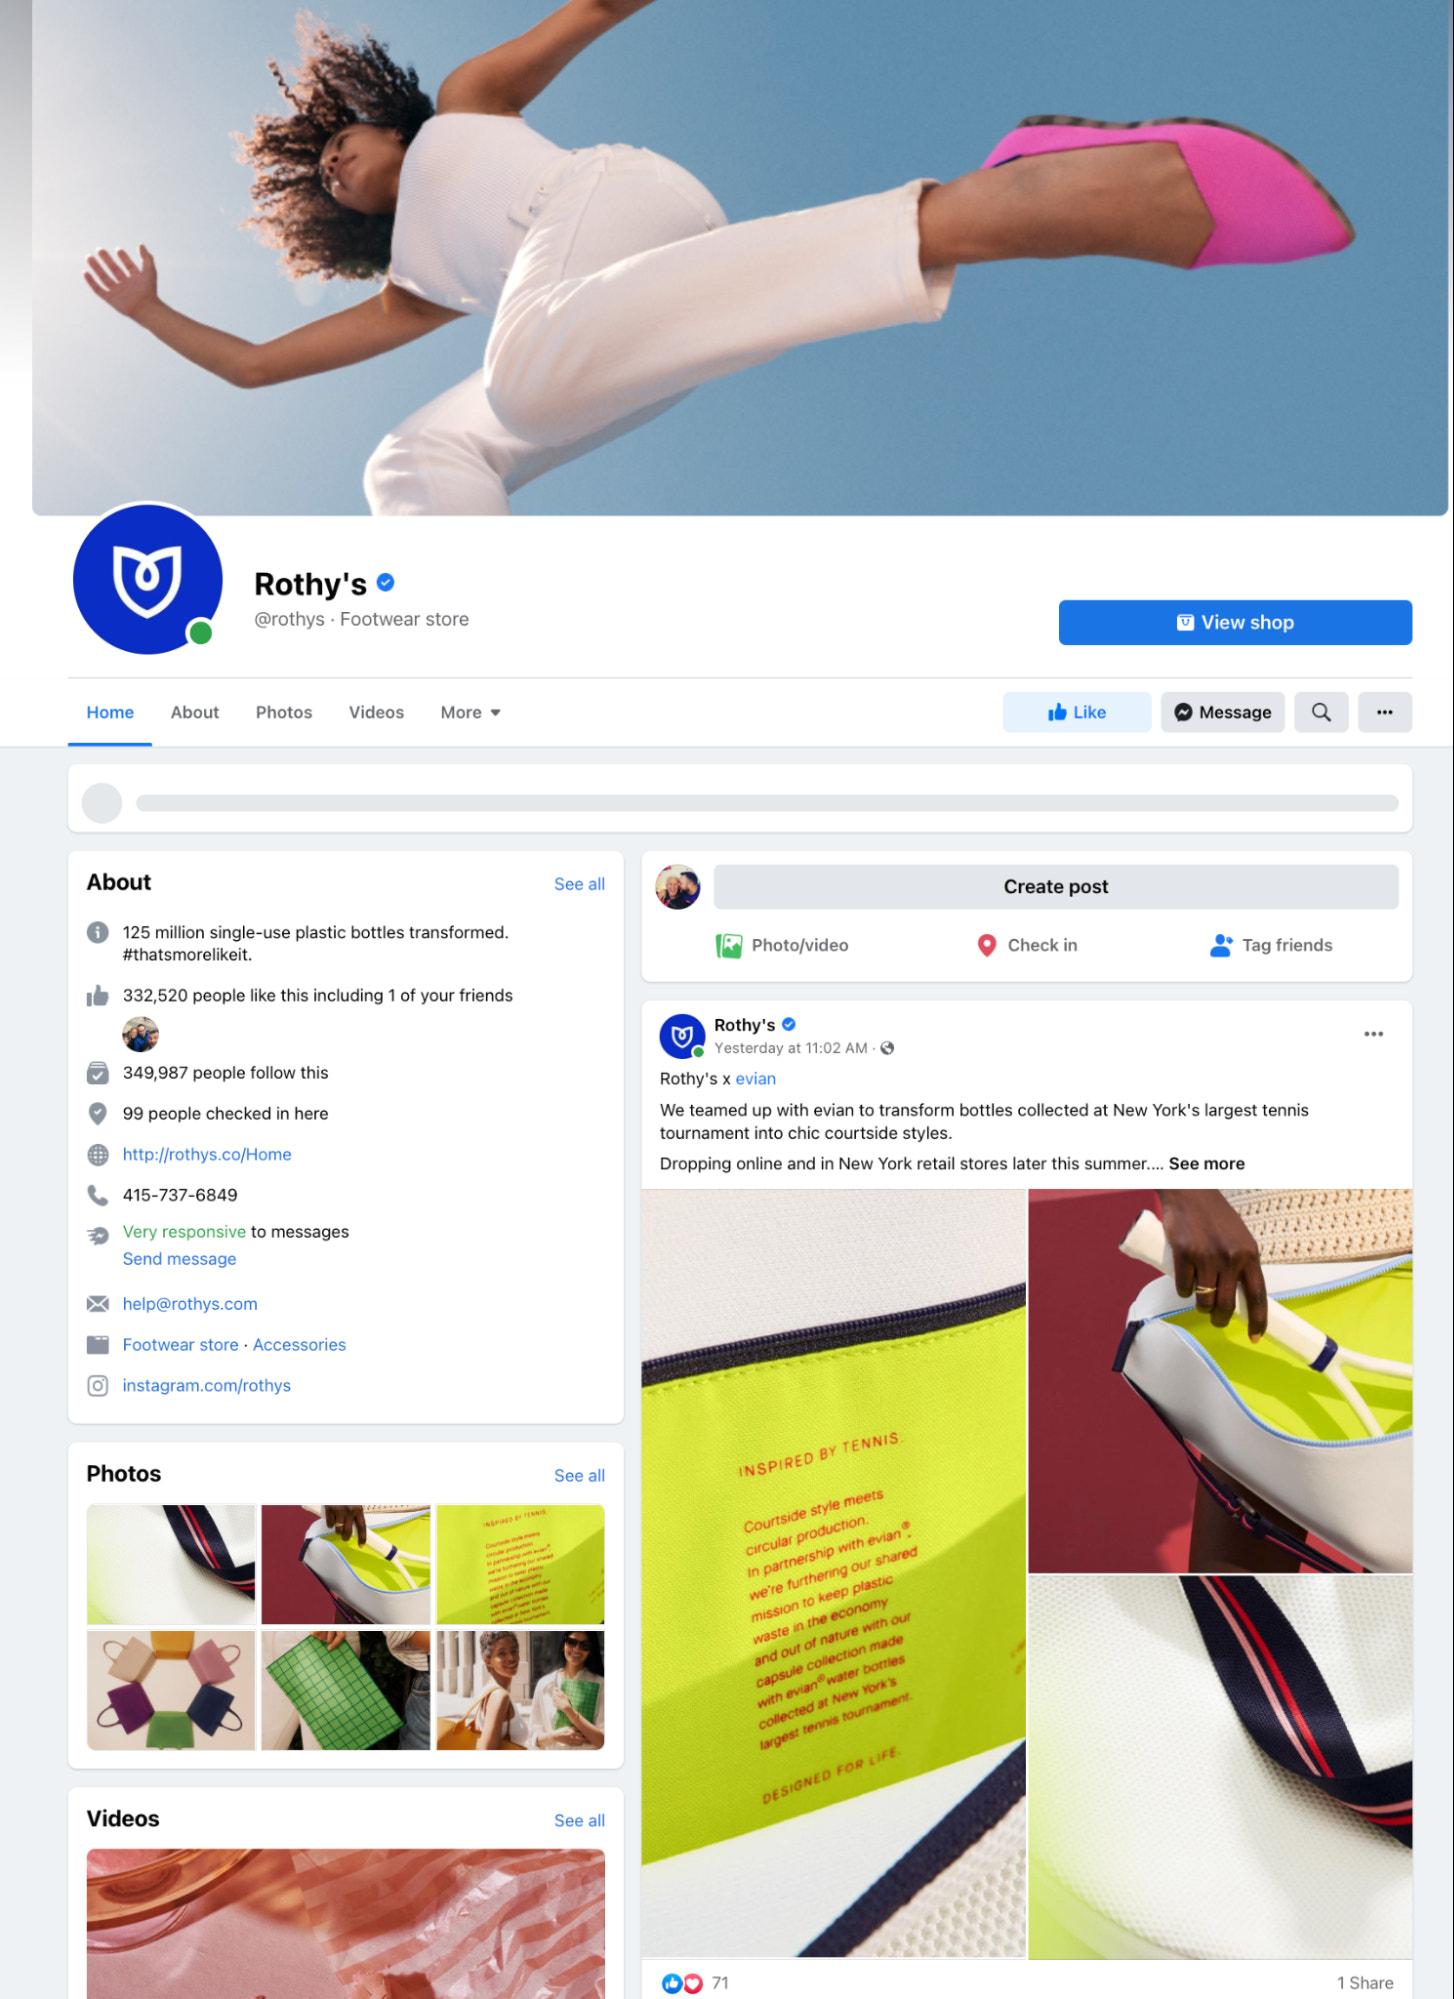 Facebook Rolls Out 'SMB Guide' For Small Businesses To Move Online